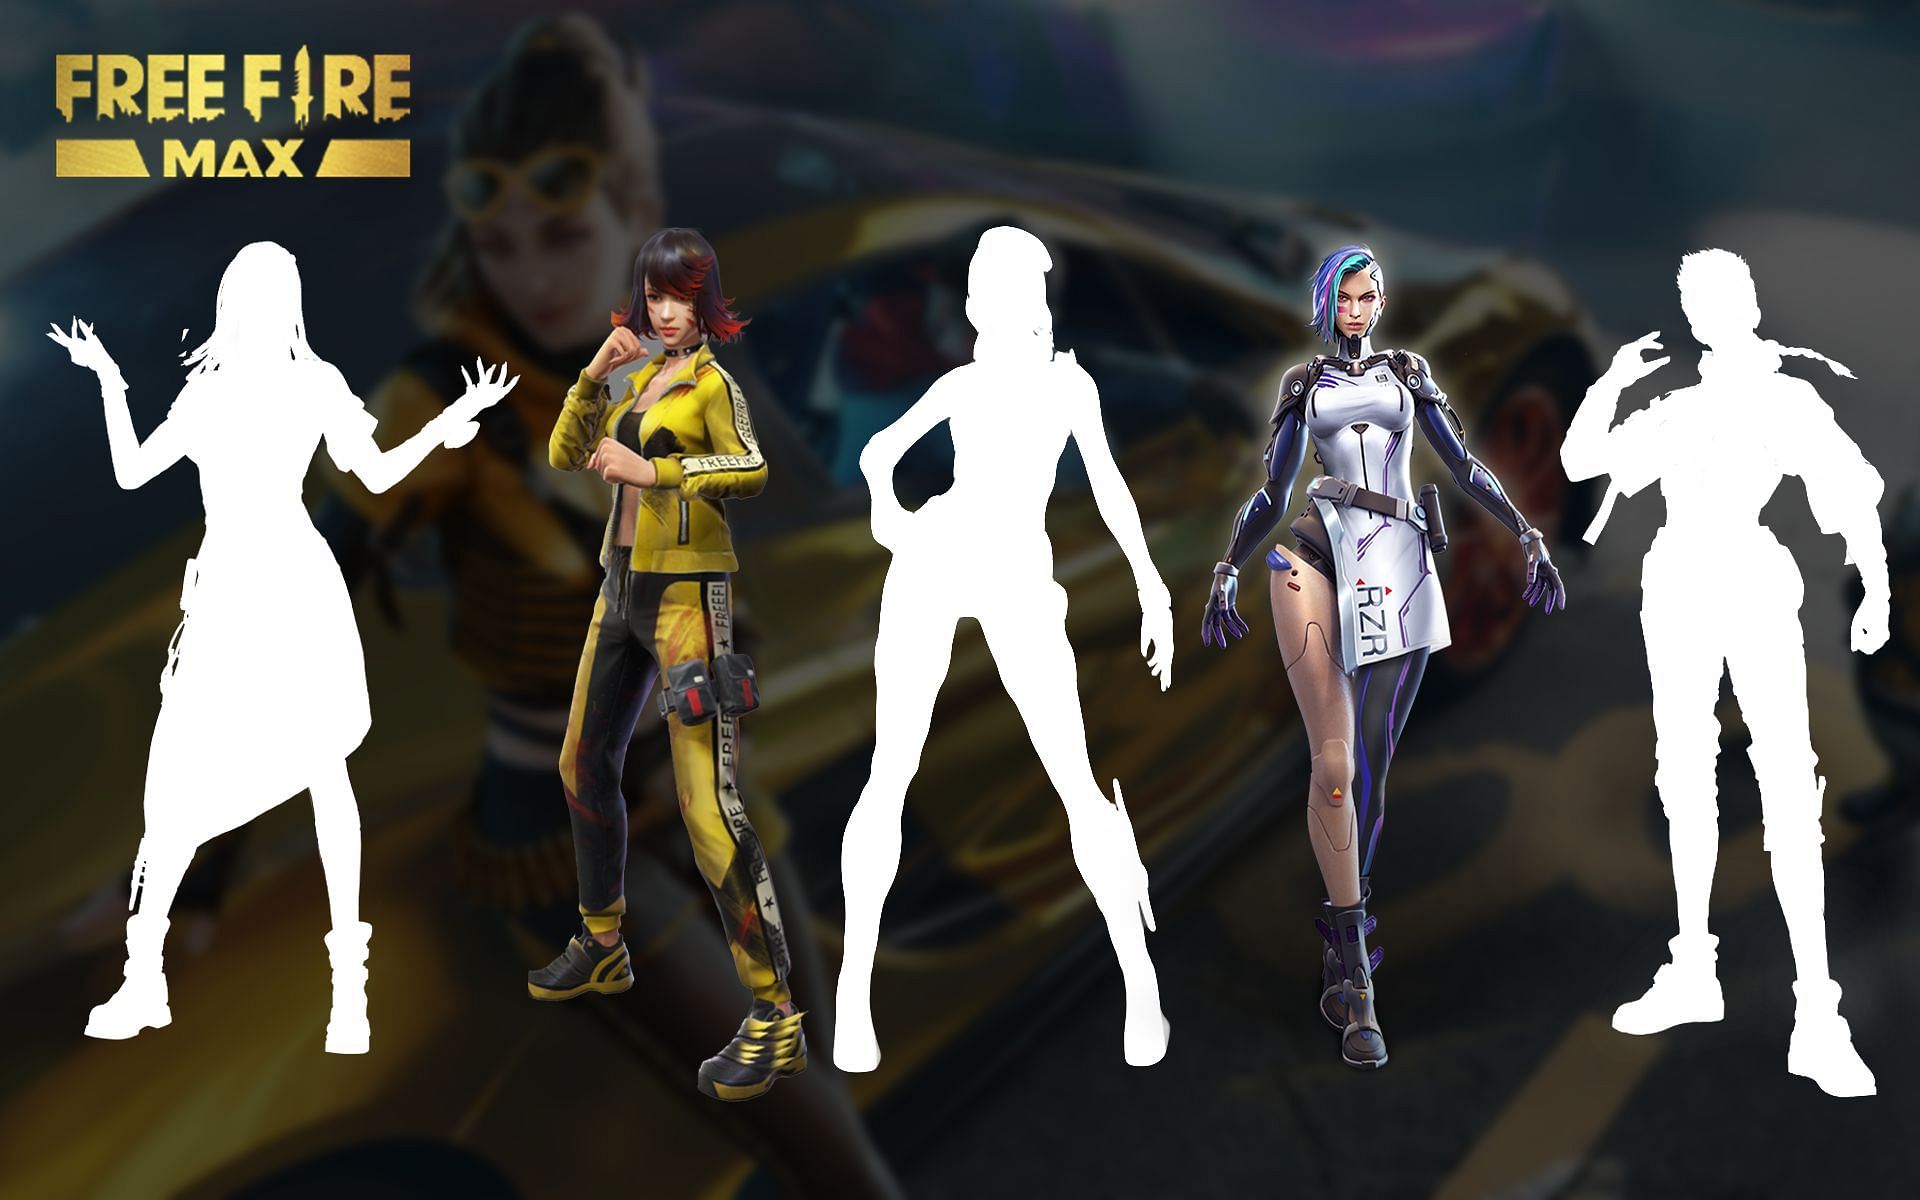 Using these Free Fire MAX female characters in combat will be a game-changer (Image via Sportskeeda)